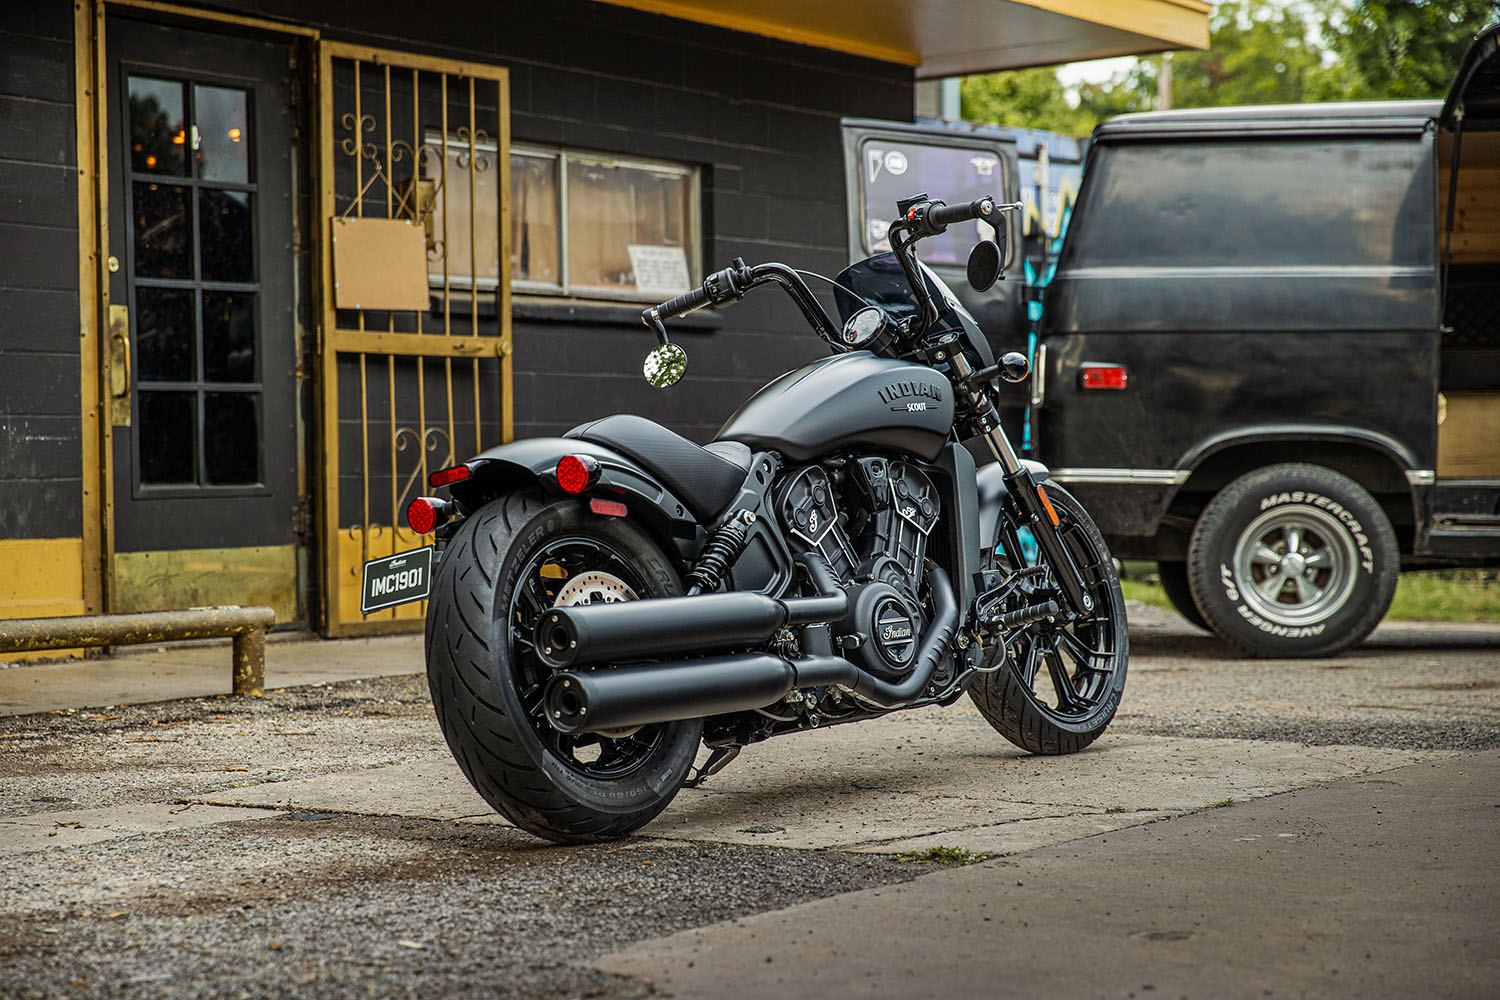 2022 Indian Scout® Rogue ABS in Muskego, Wisconsin - Photo 15